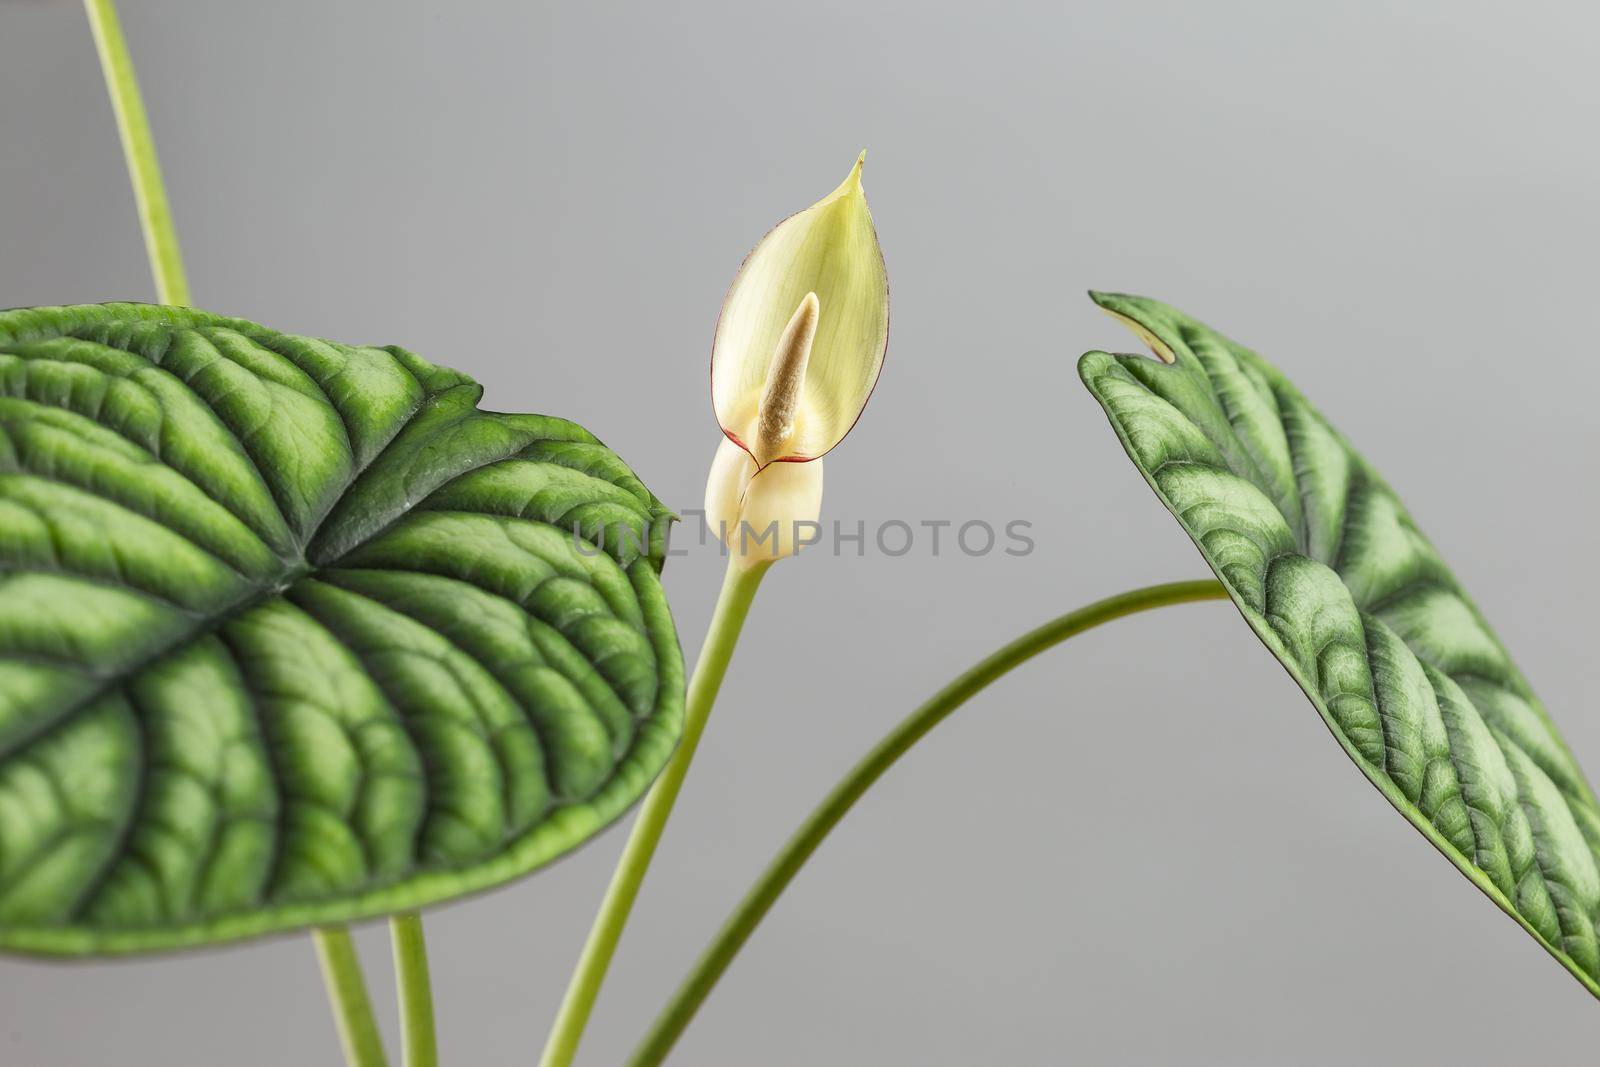 Alocasia blooming with a tiny white flower by Syvanych